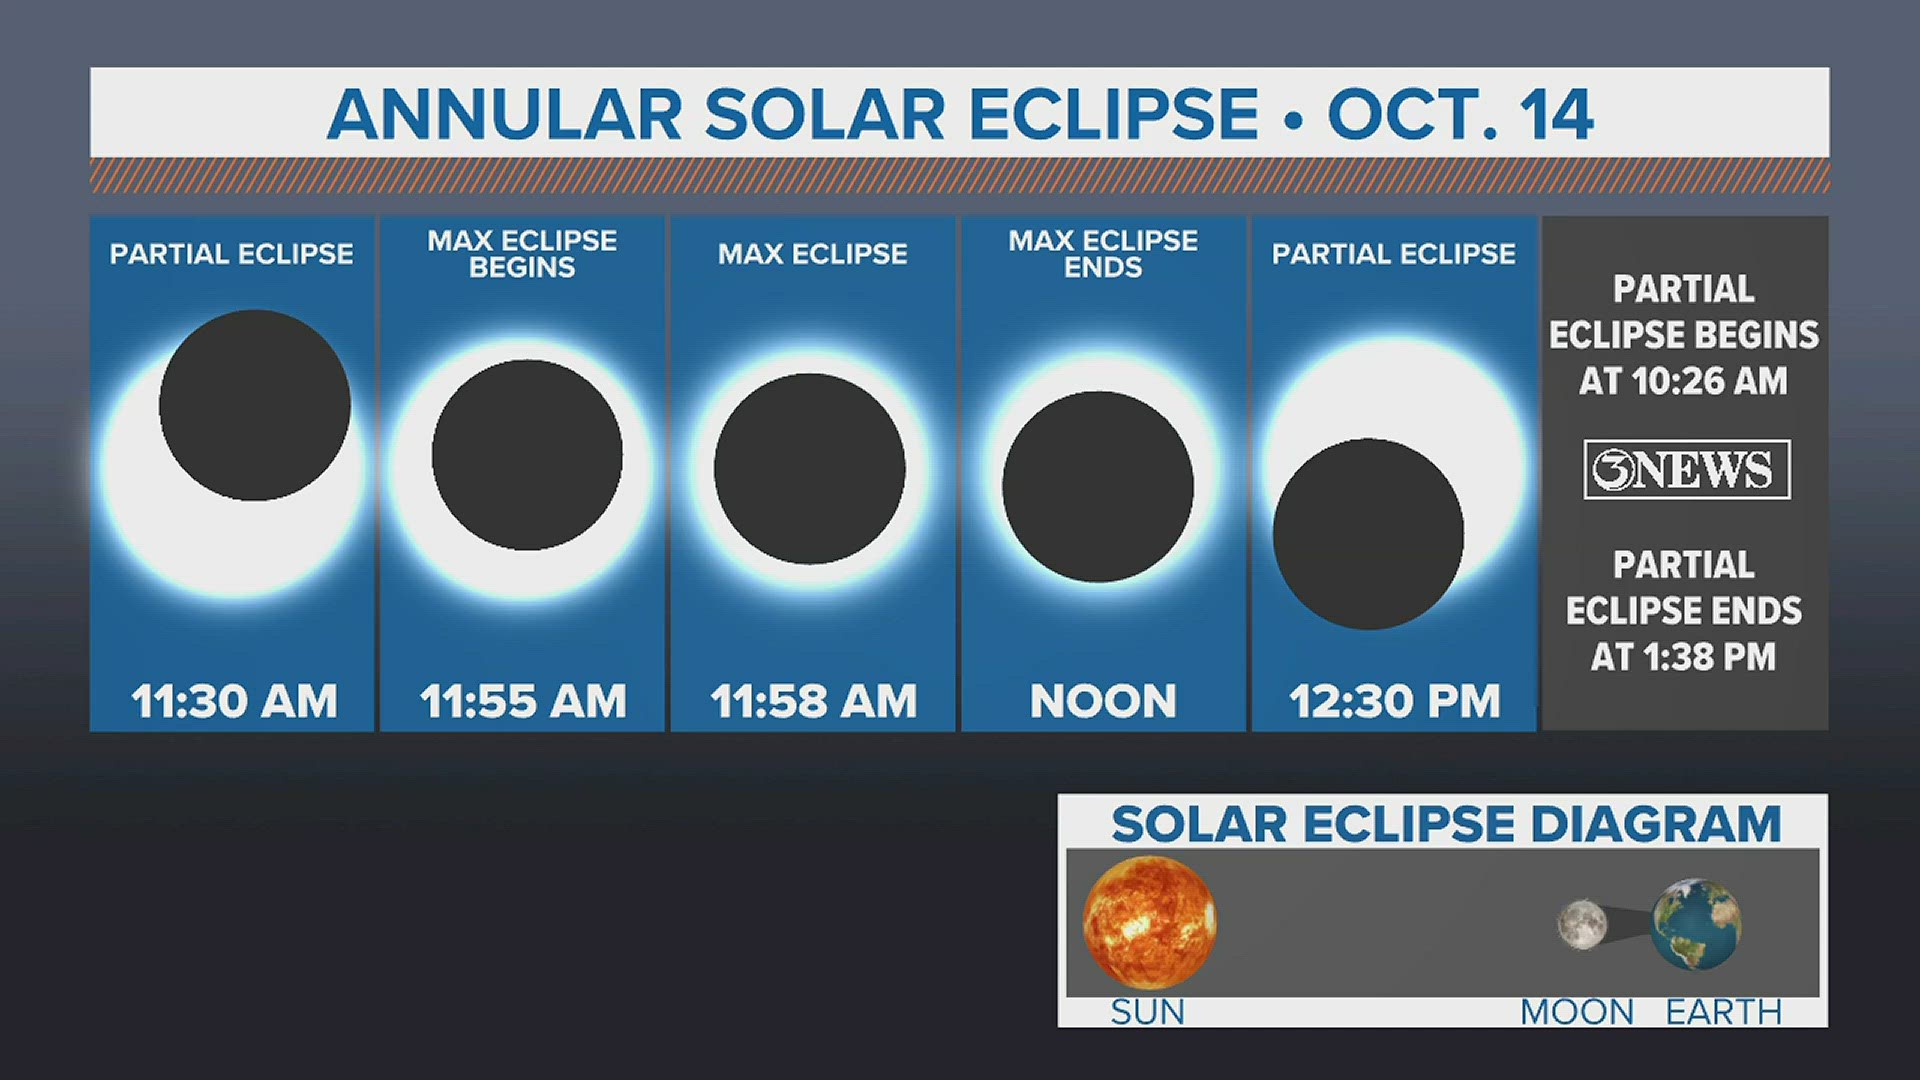 The eclipse will be fully visible over Corpus Christi on October 14.